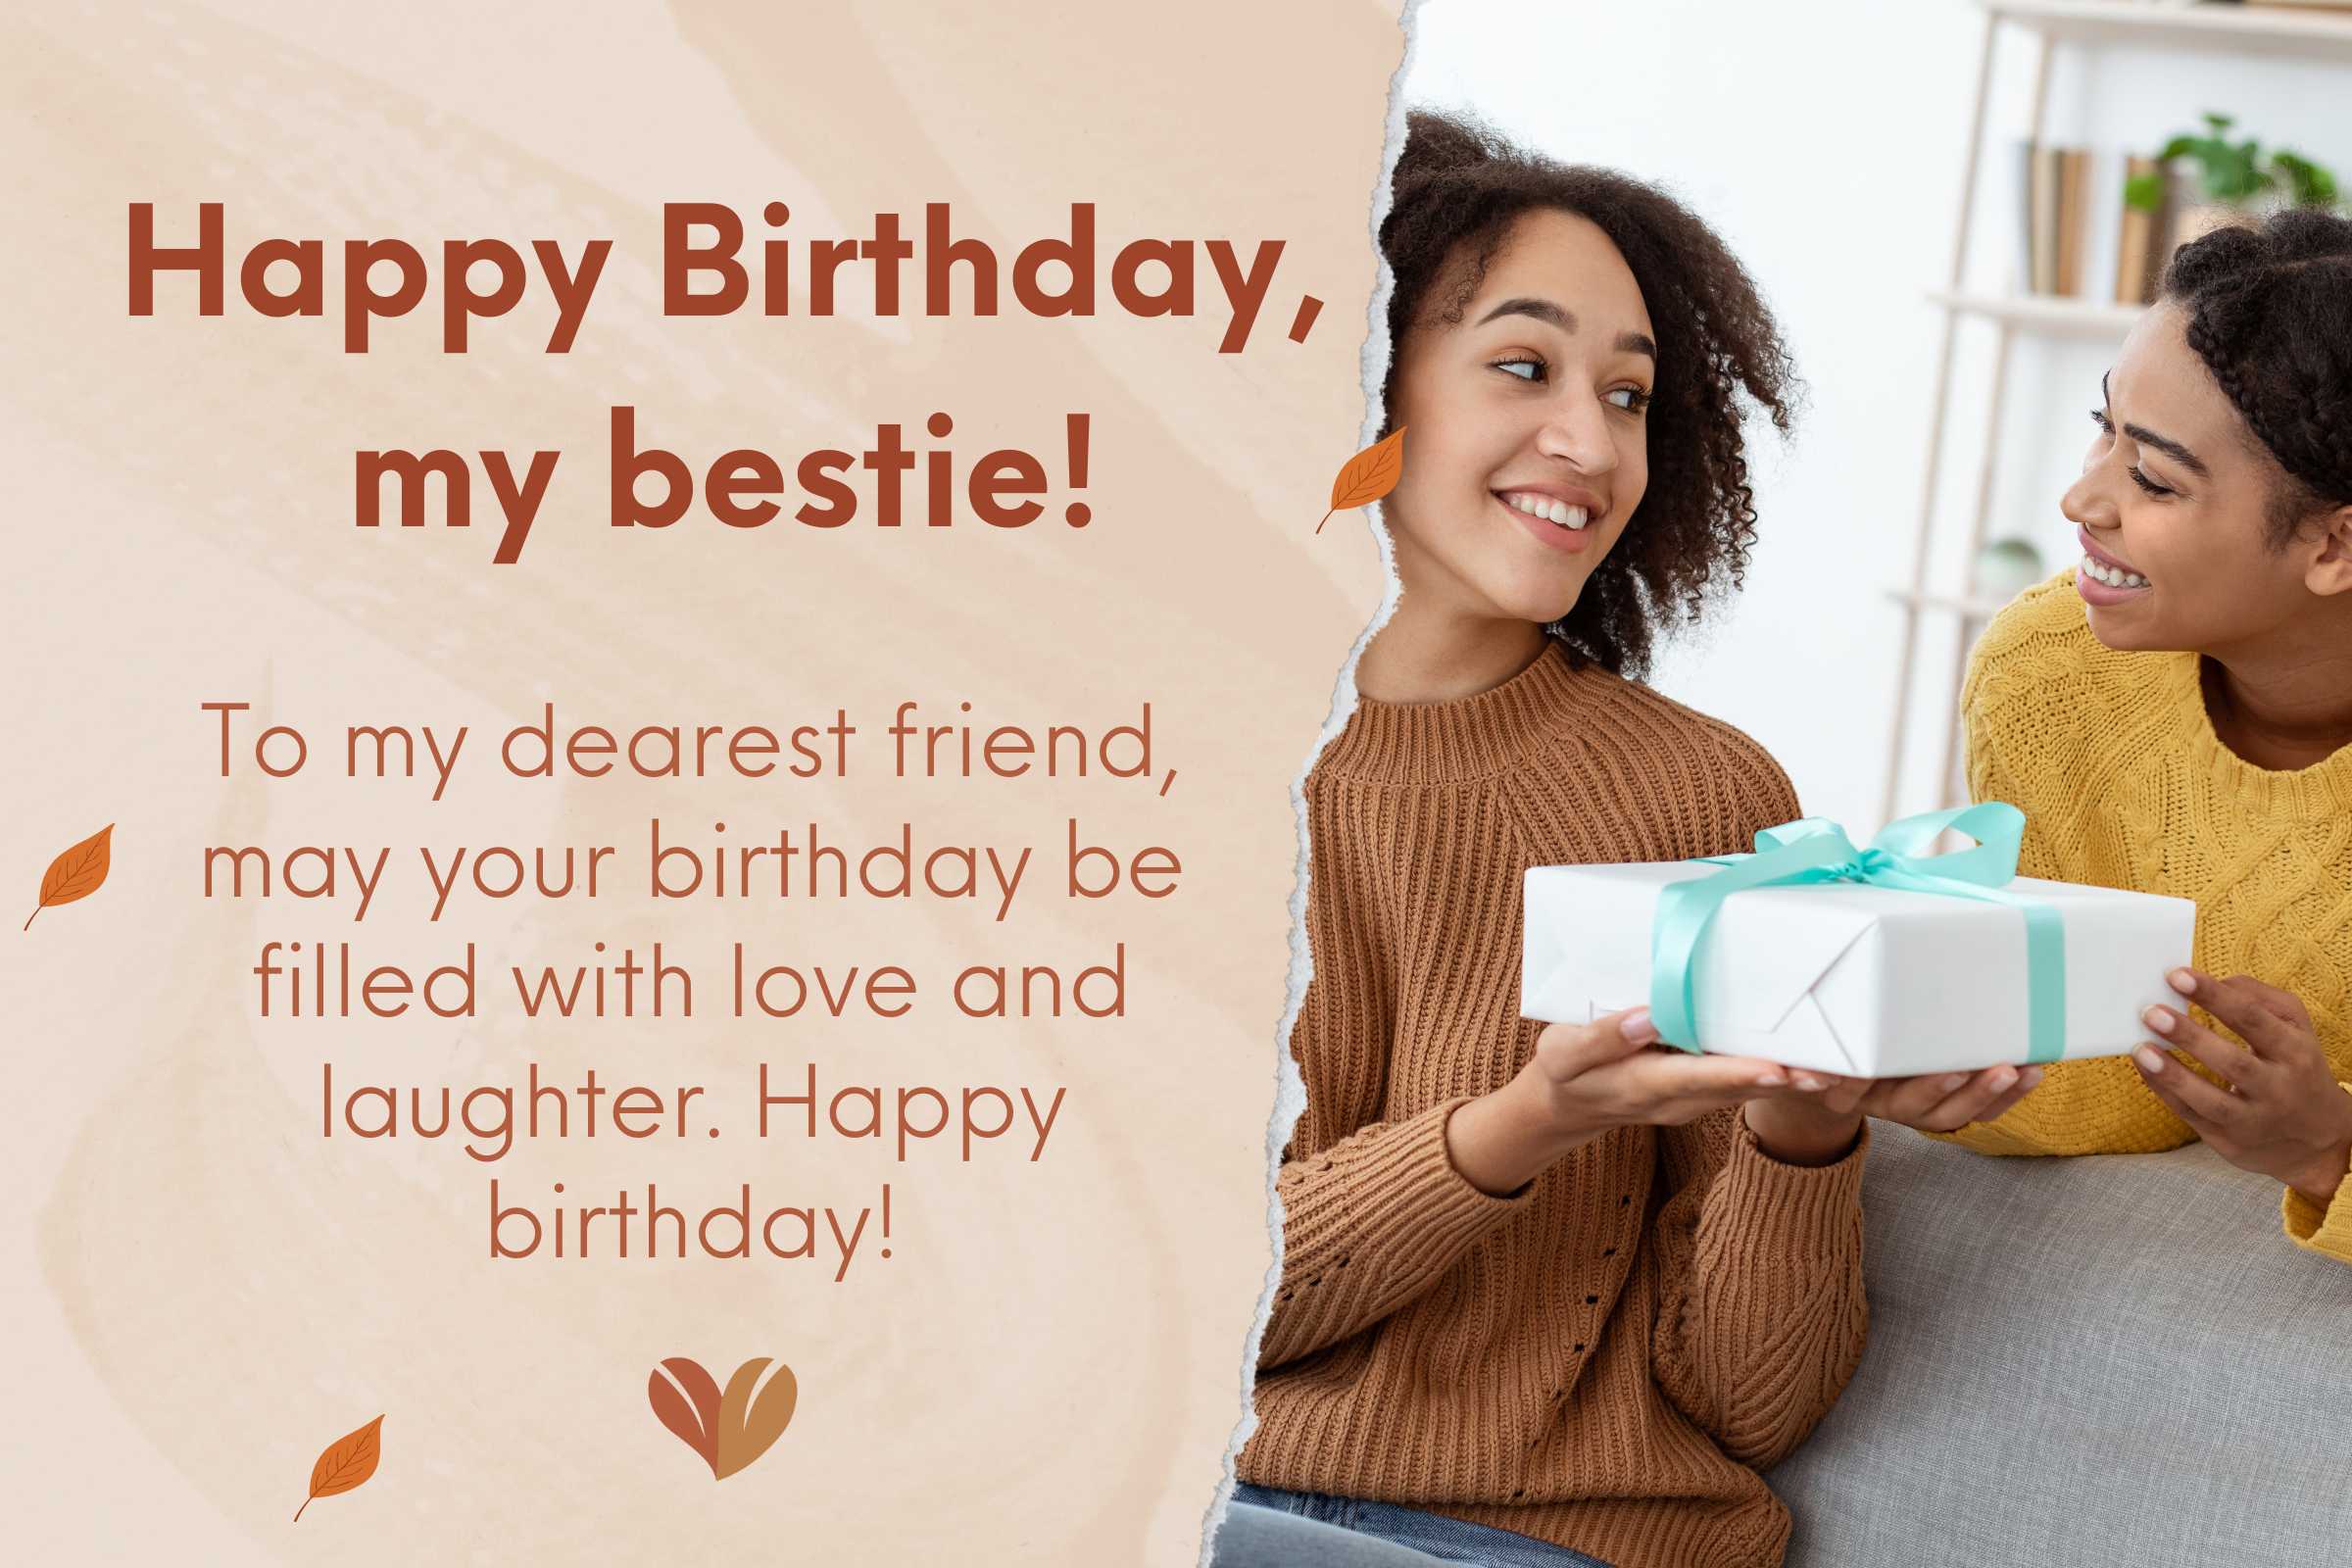 May your birthday be filled with love and laughter - Happy birthday female friend